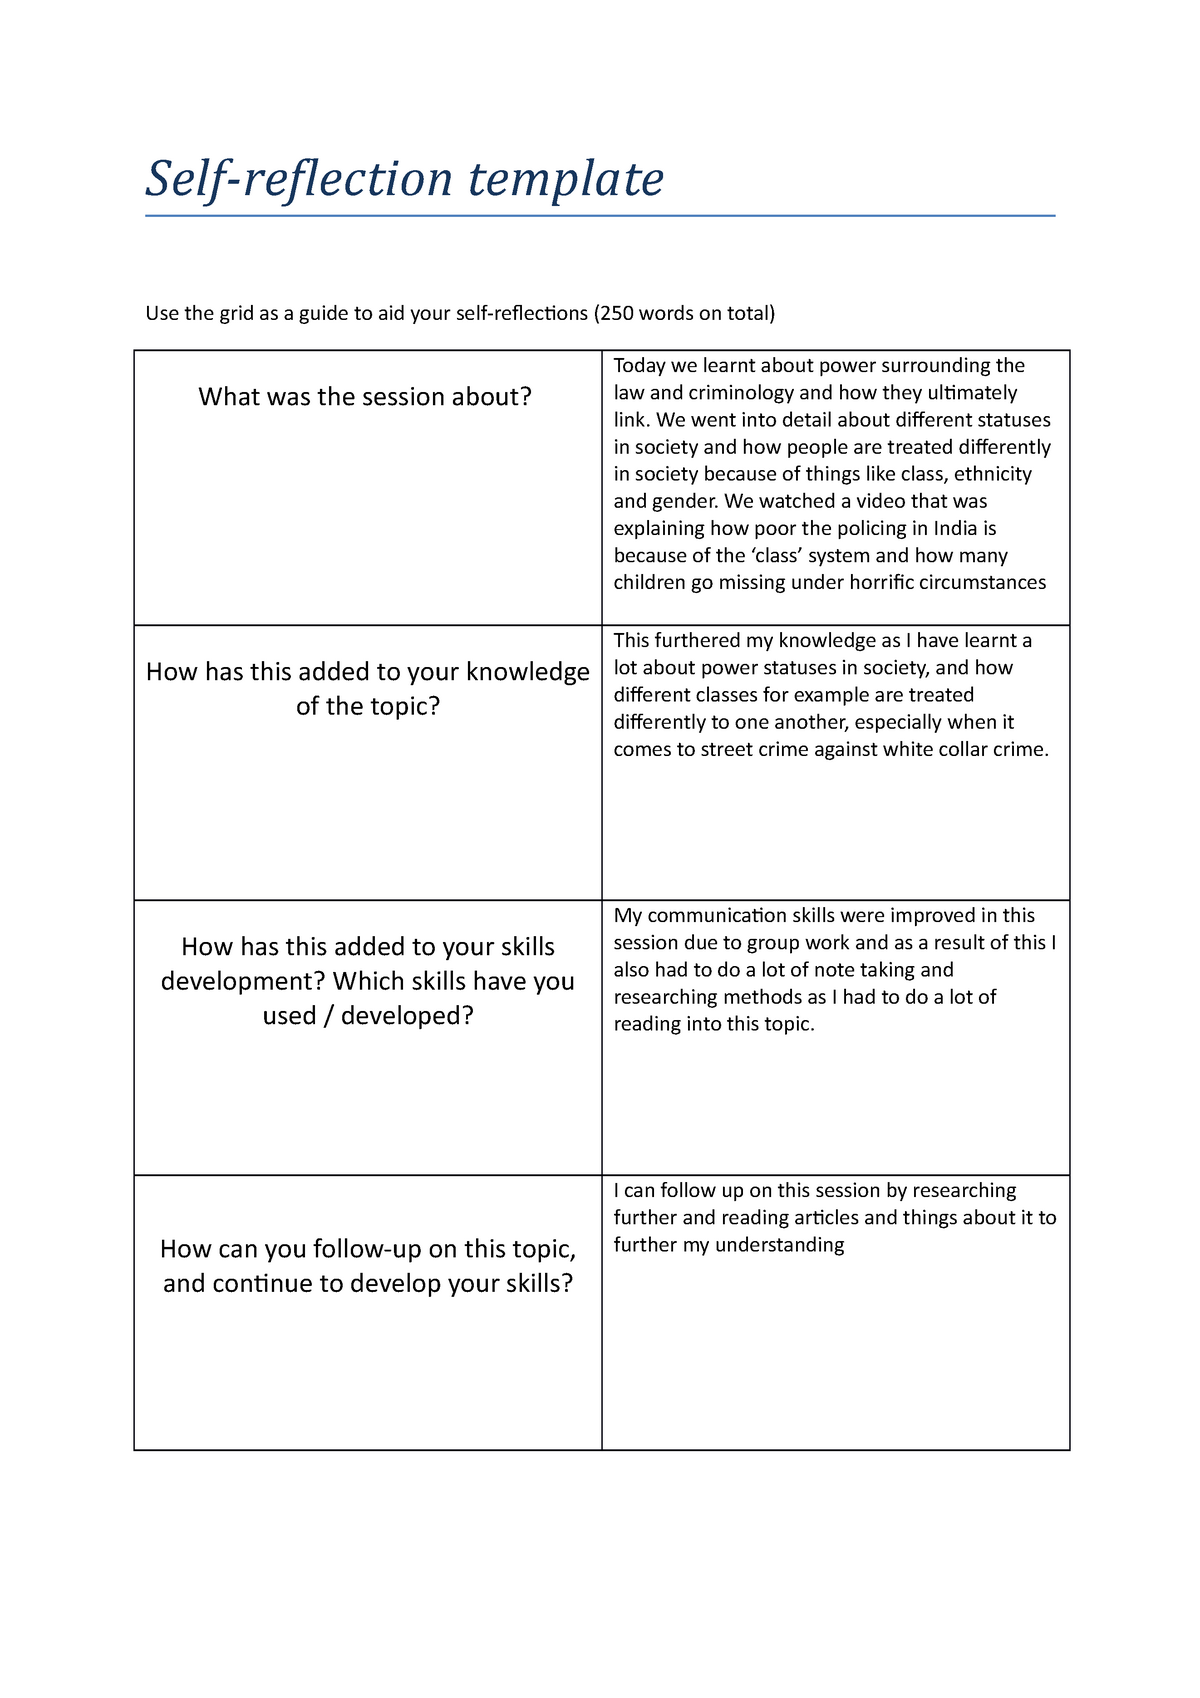 self-reflection-template-week-28-self-reflection-template-use-the